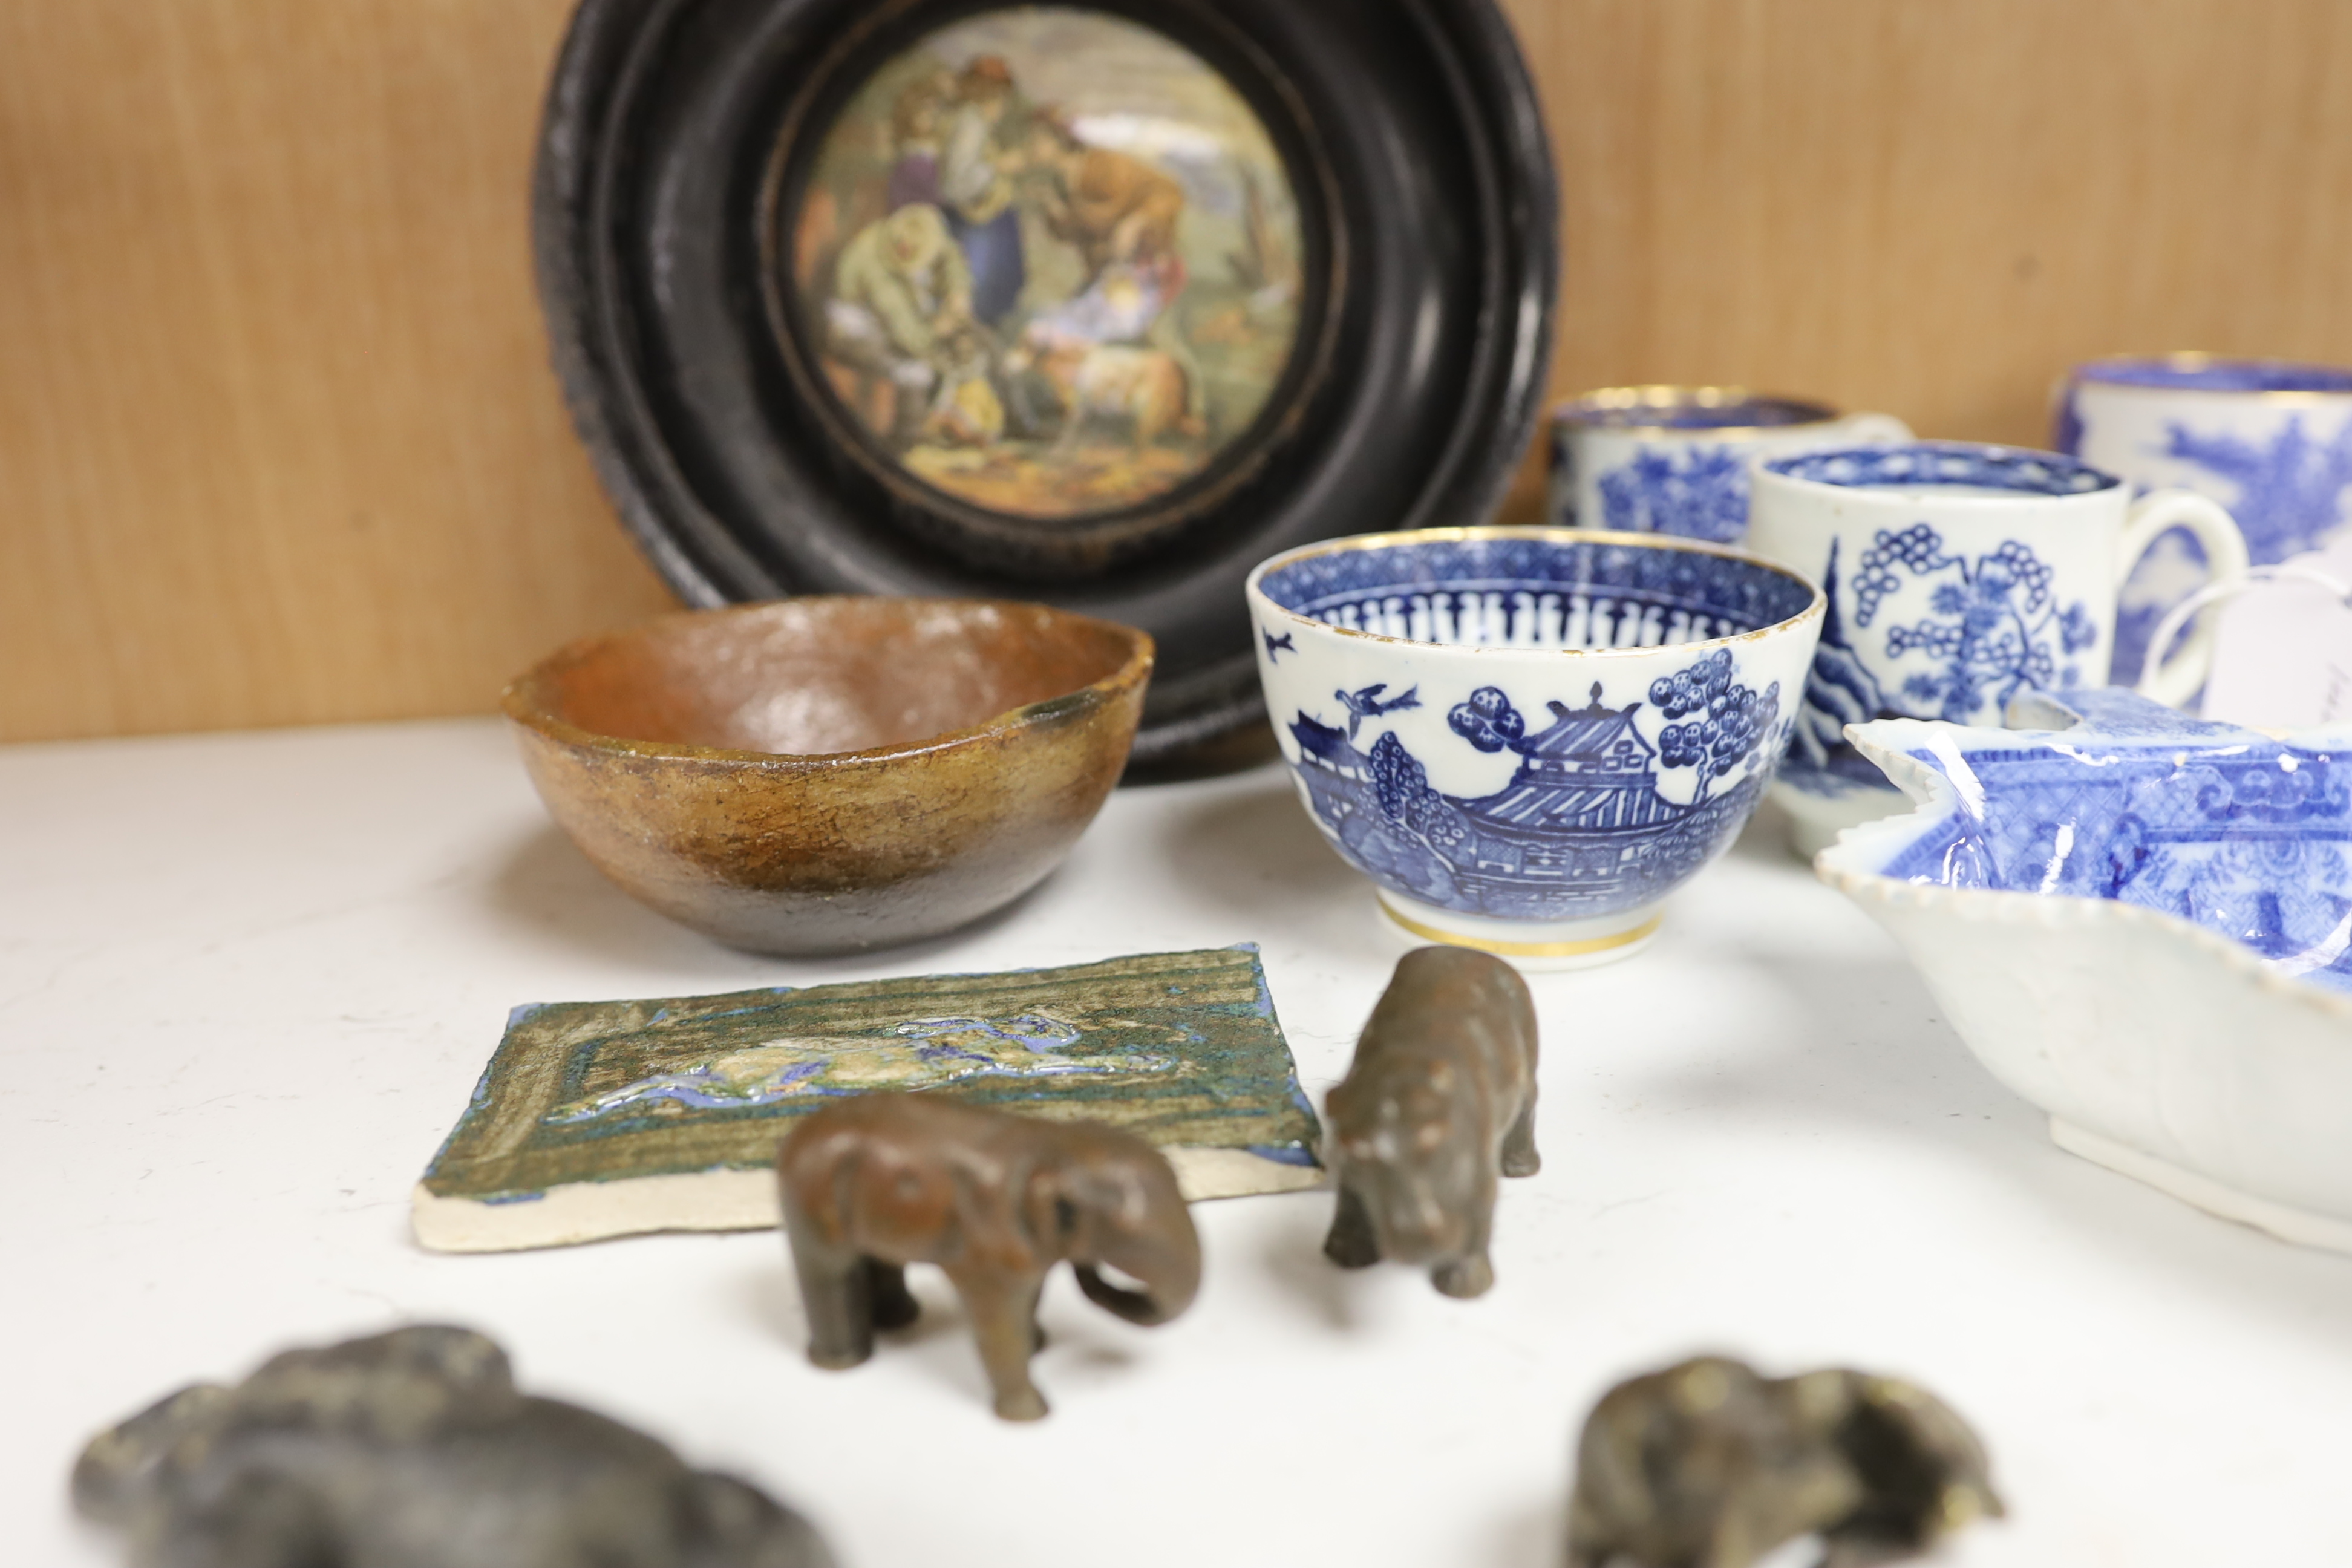 An early 20th century Viennese cold painted bronze figure of an African grey parrot, two 18th century English coffee cups, a leaf shape pickle dish, Victorian pot lid, other metal animal figures, a Japanese small carved